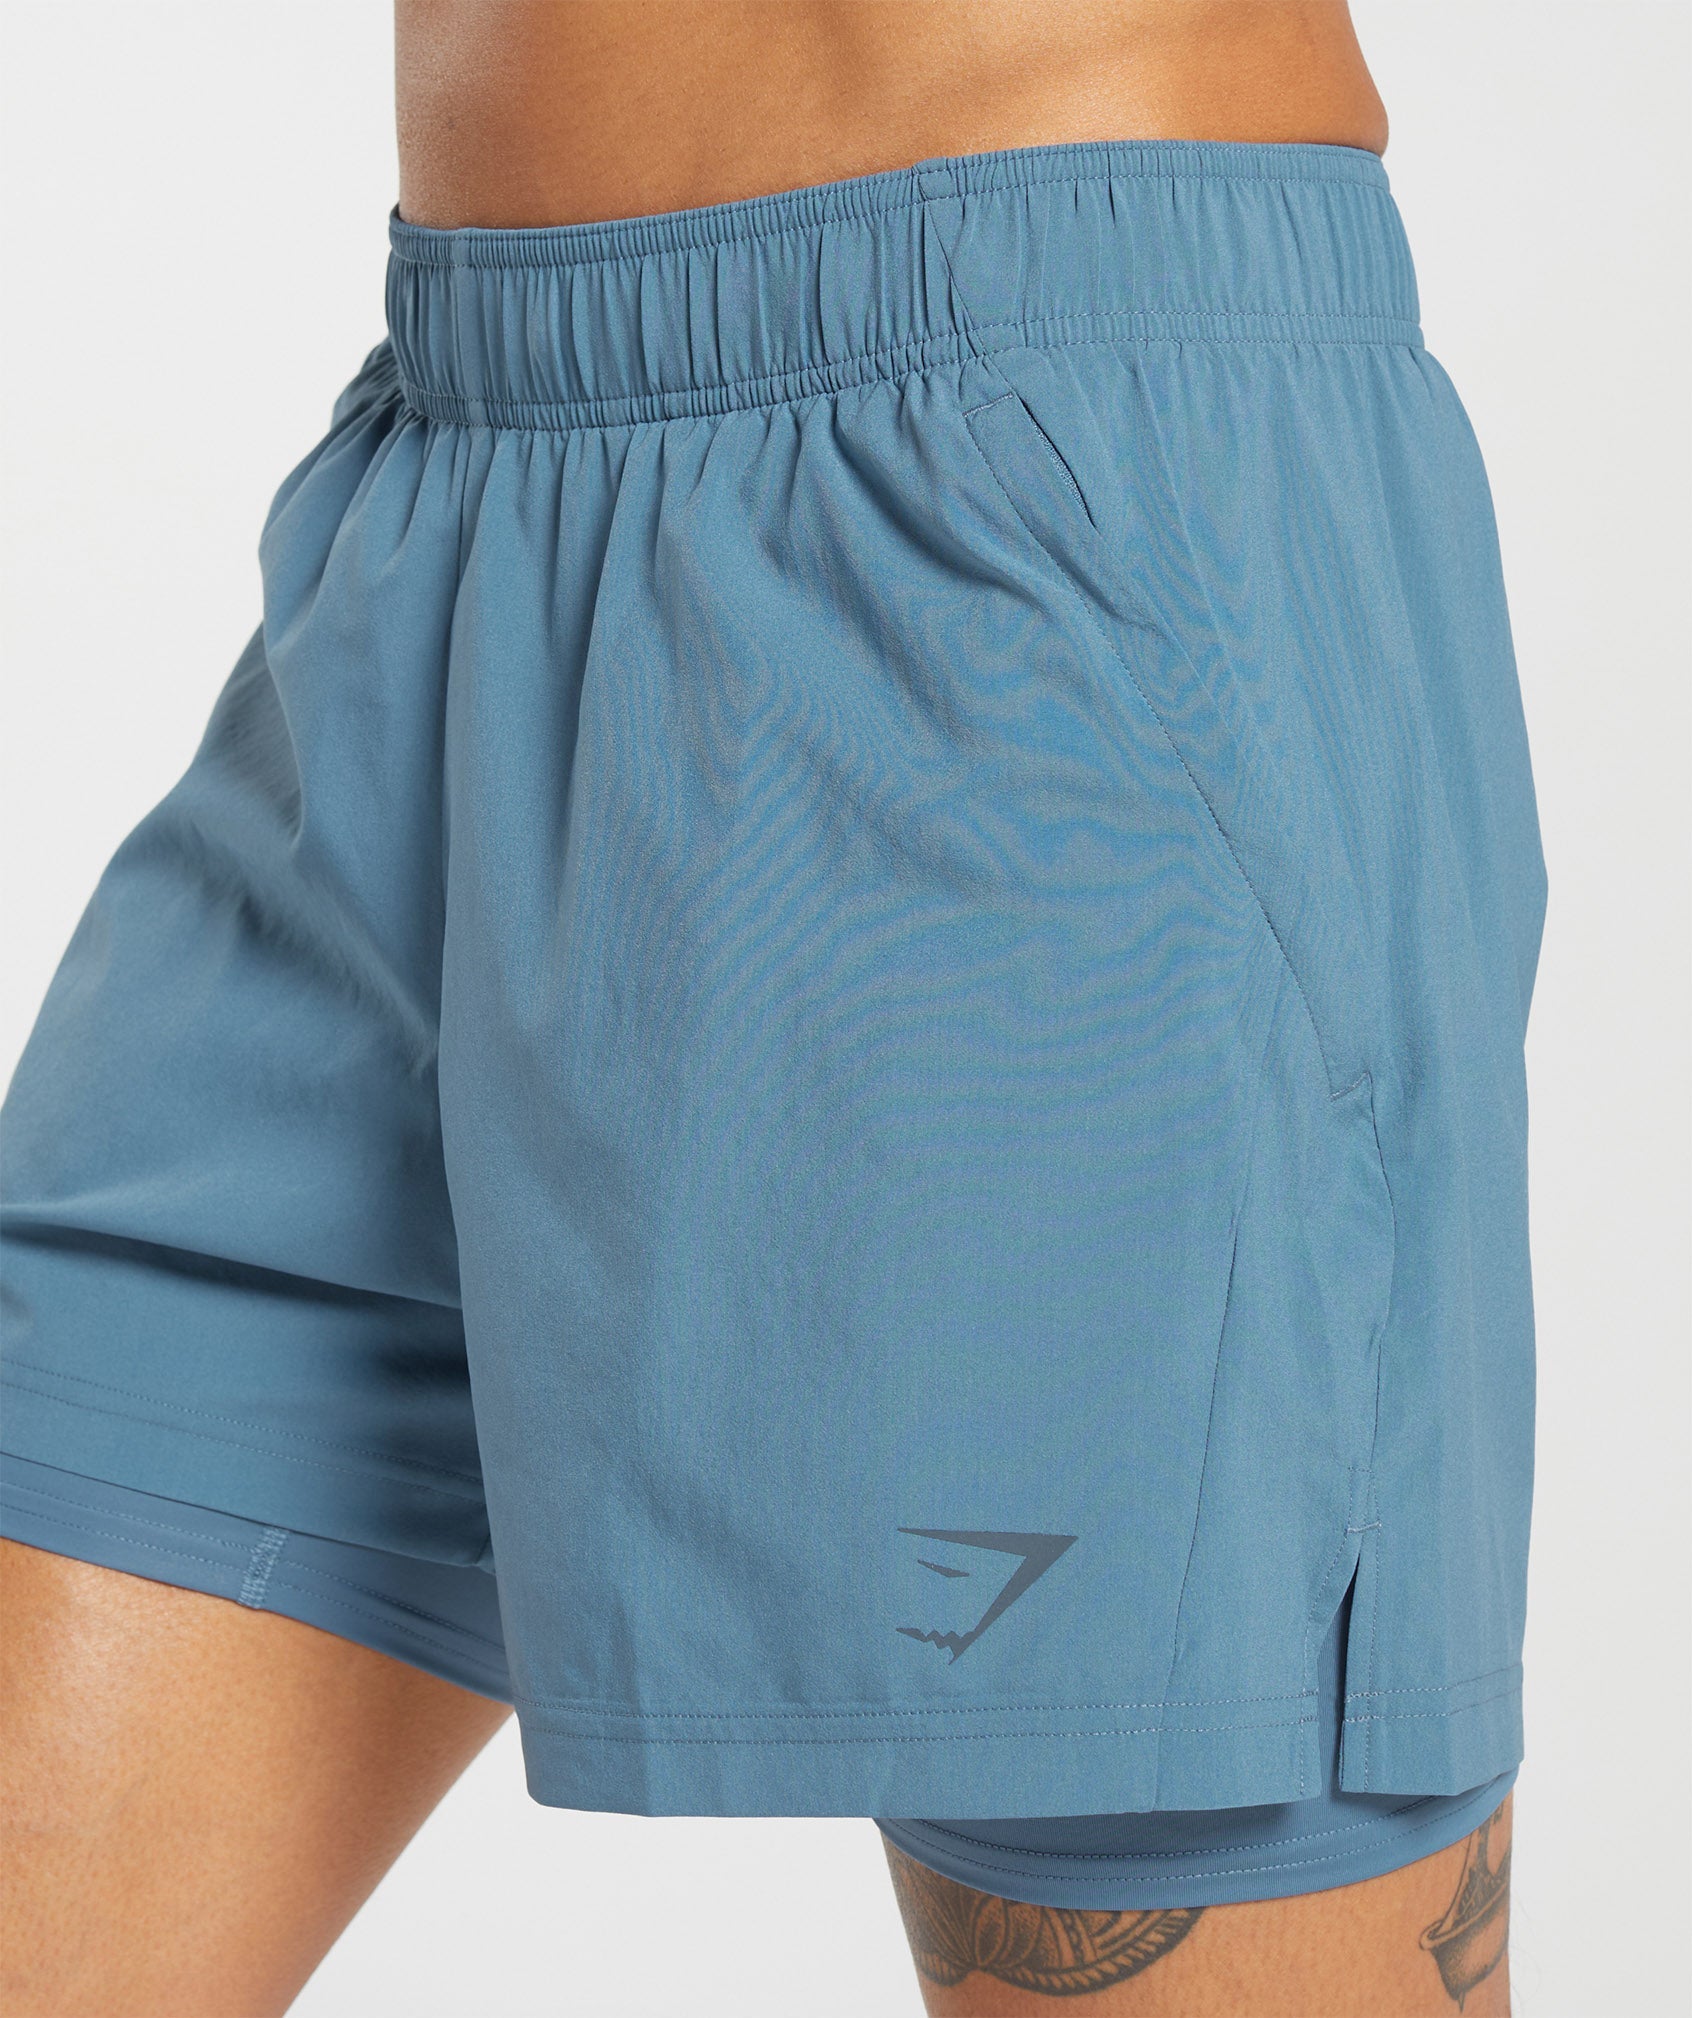 Sport 5" 2 in 1 Shorts in Faded Blue/Faded Blue - view 6